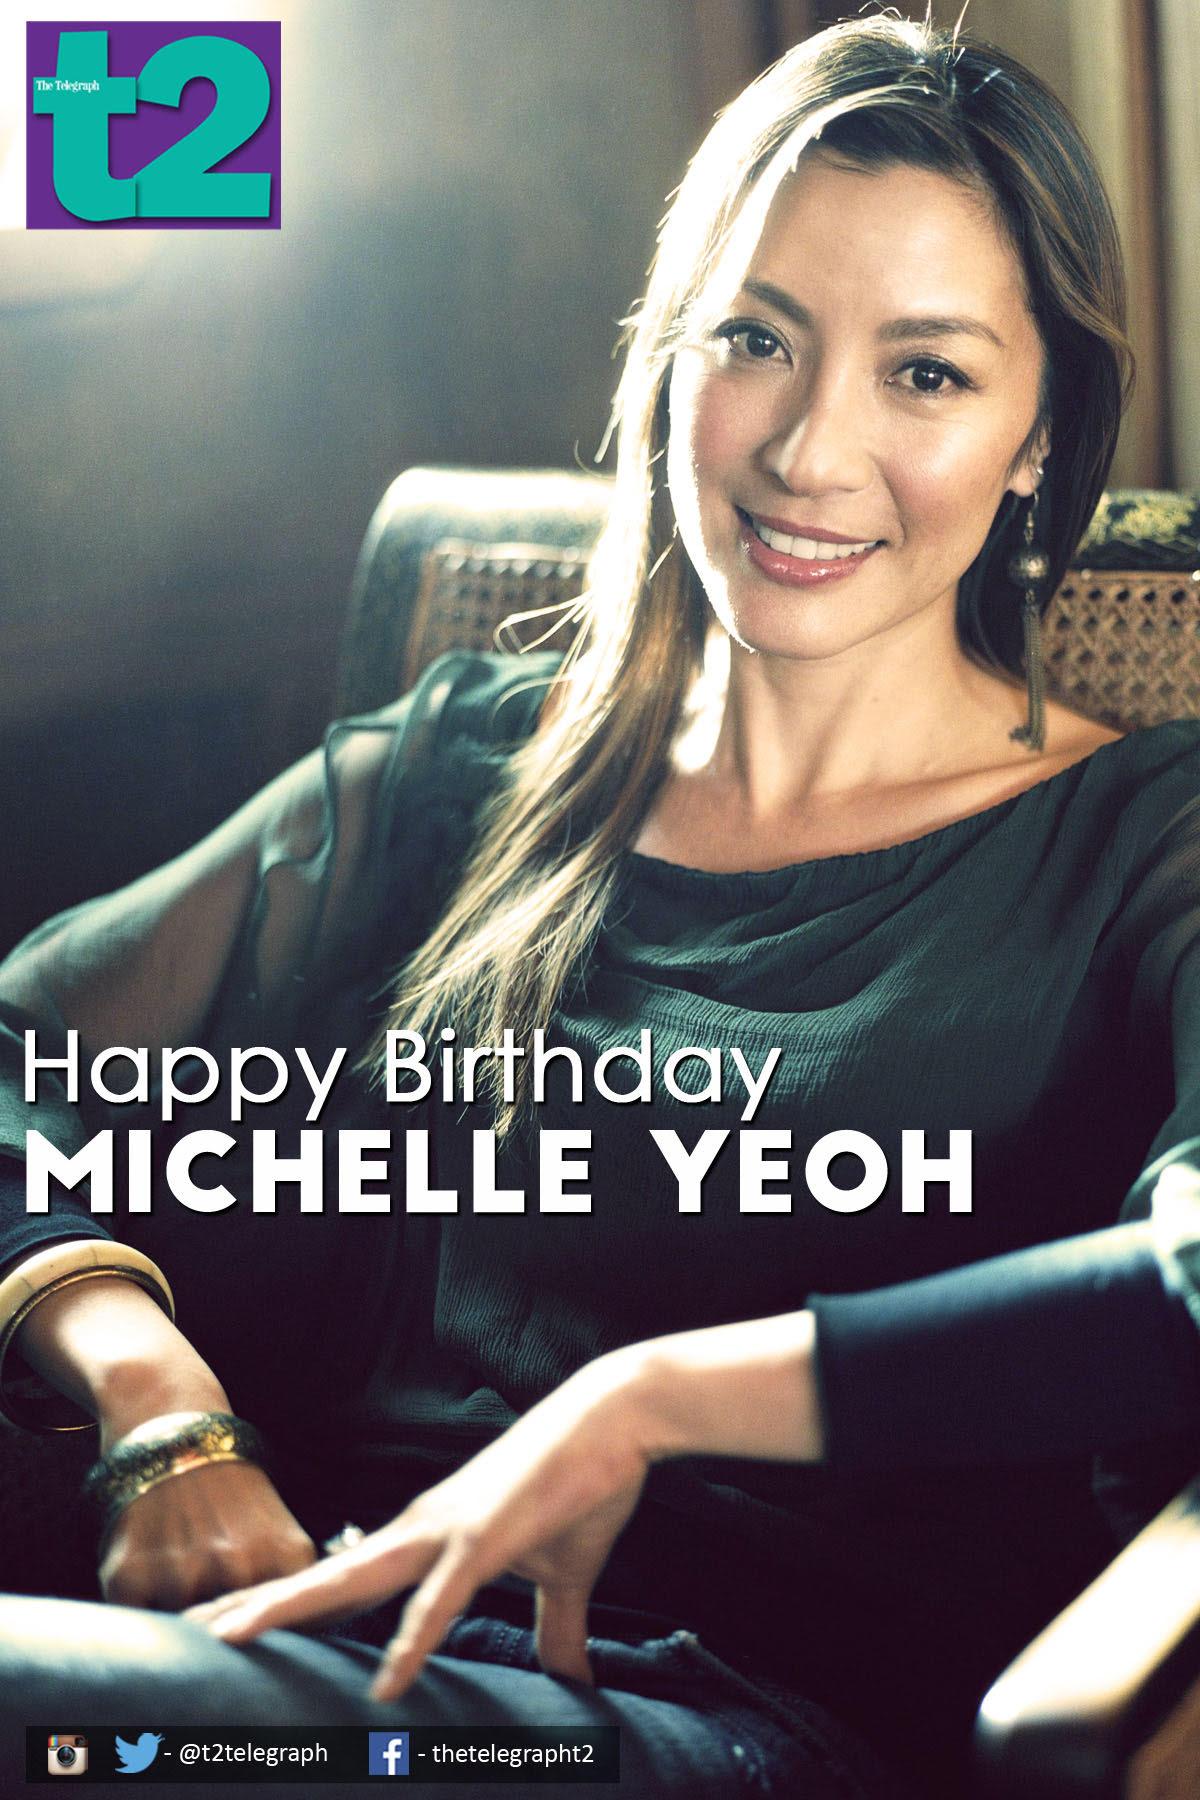 Happy birthday to the action queen Michelle Yeoh. or - which is your pick? 